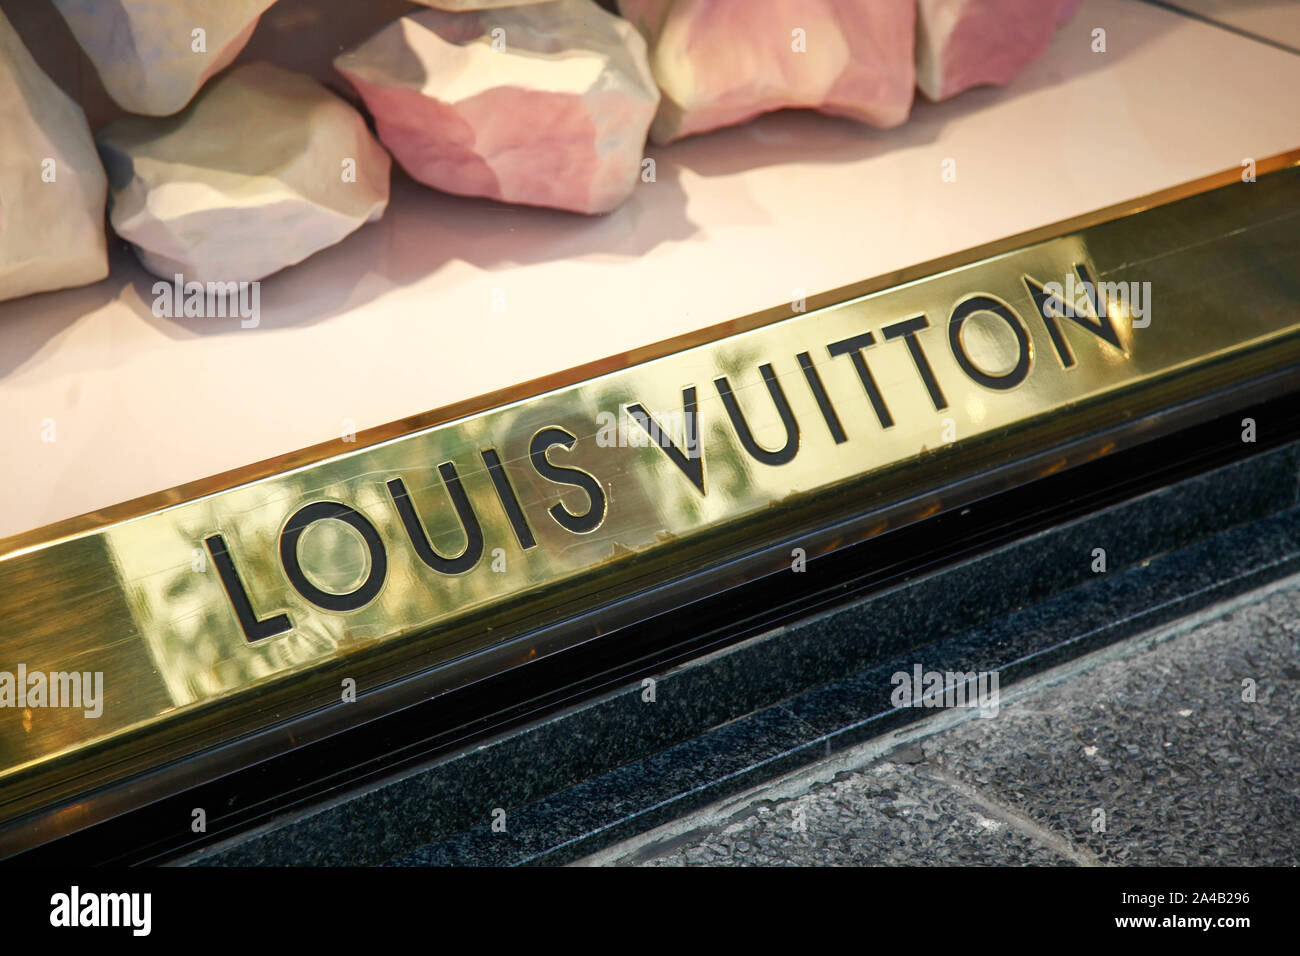 Louis Vuitton store in Nice on the French Riviera.Photo Jeppe Gustafsson  Stock Photo - Alamy